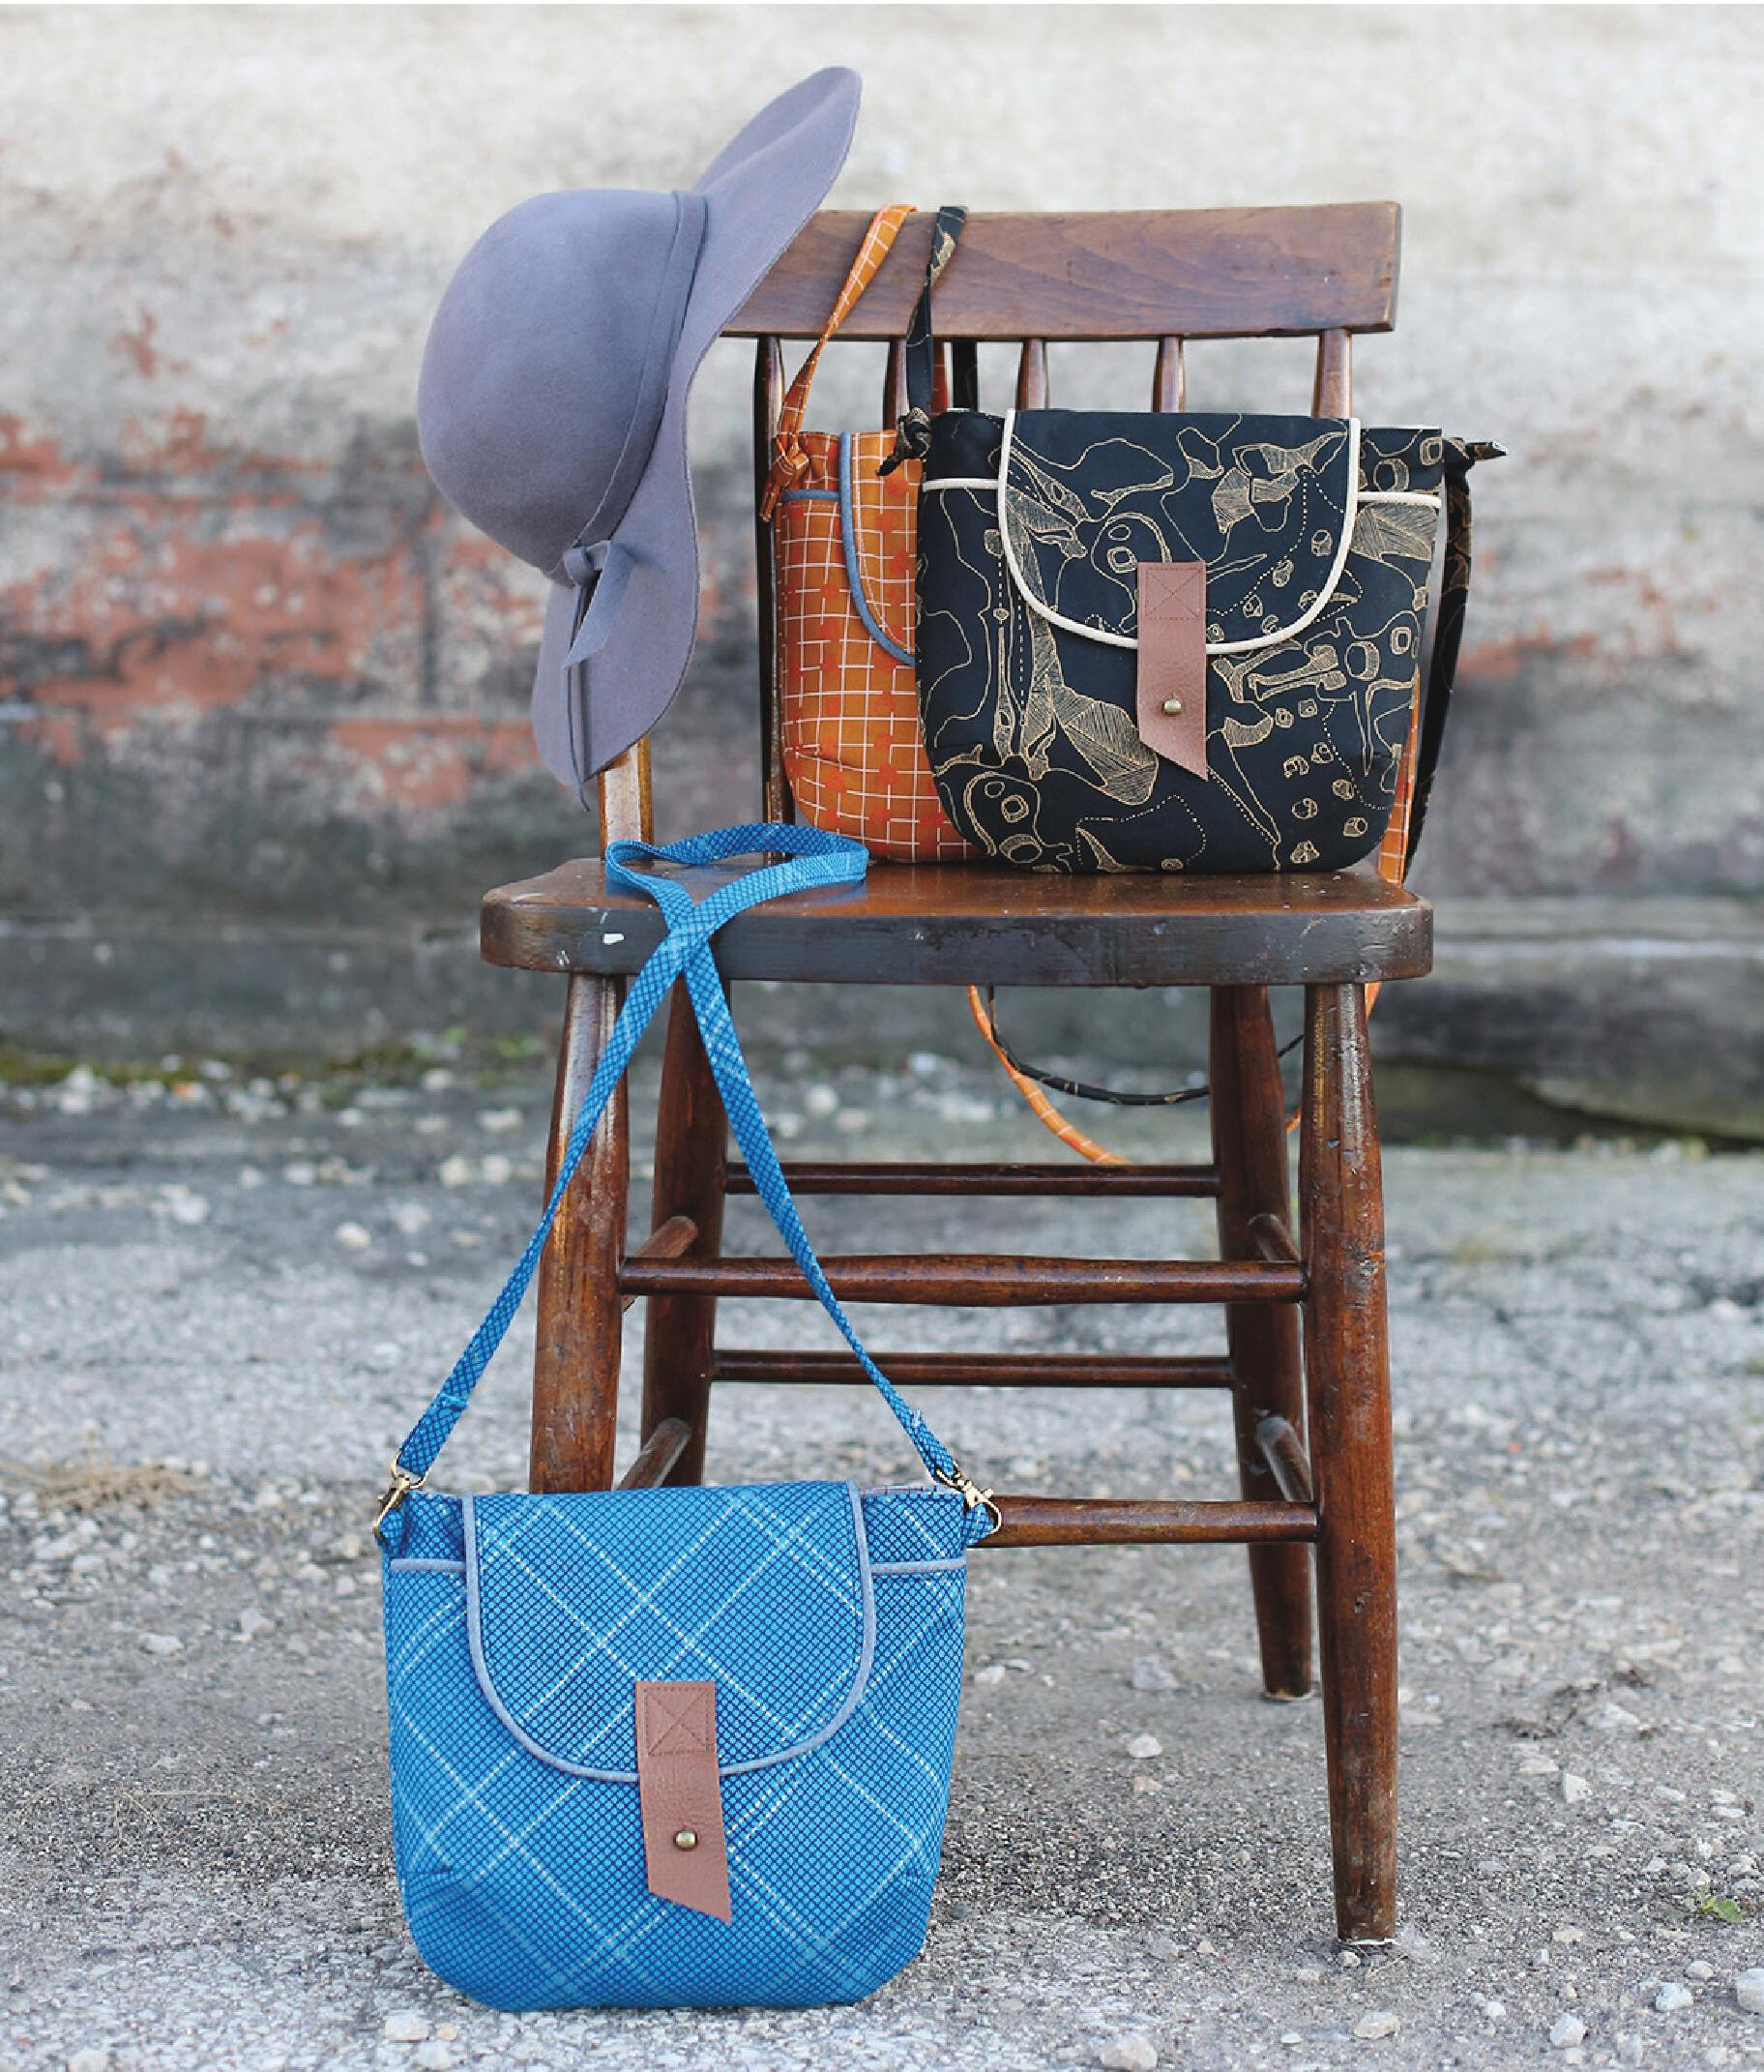 "Gatherer Crossbody Bag" is a Free Quilted or Sewn Purse Pattern designed by Anna Graham from Noodlehead for Robert Kaufman Fabrics!